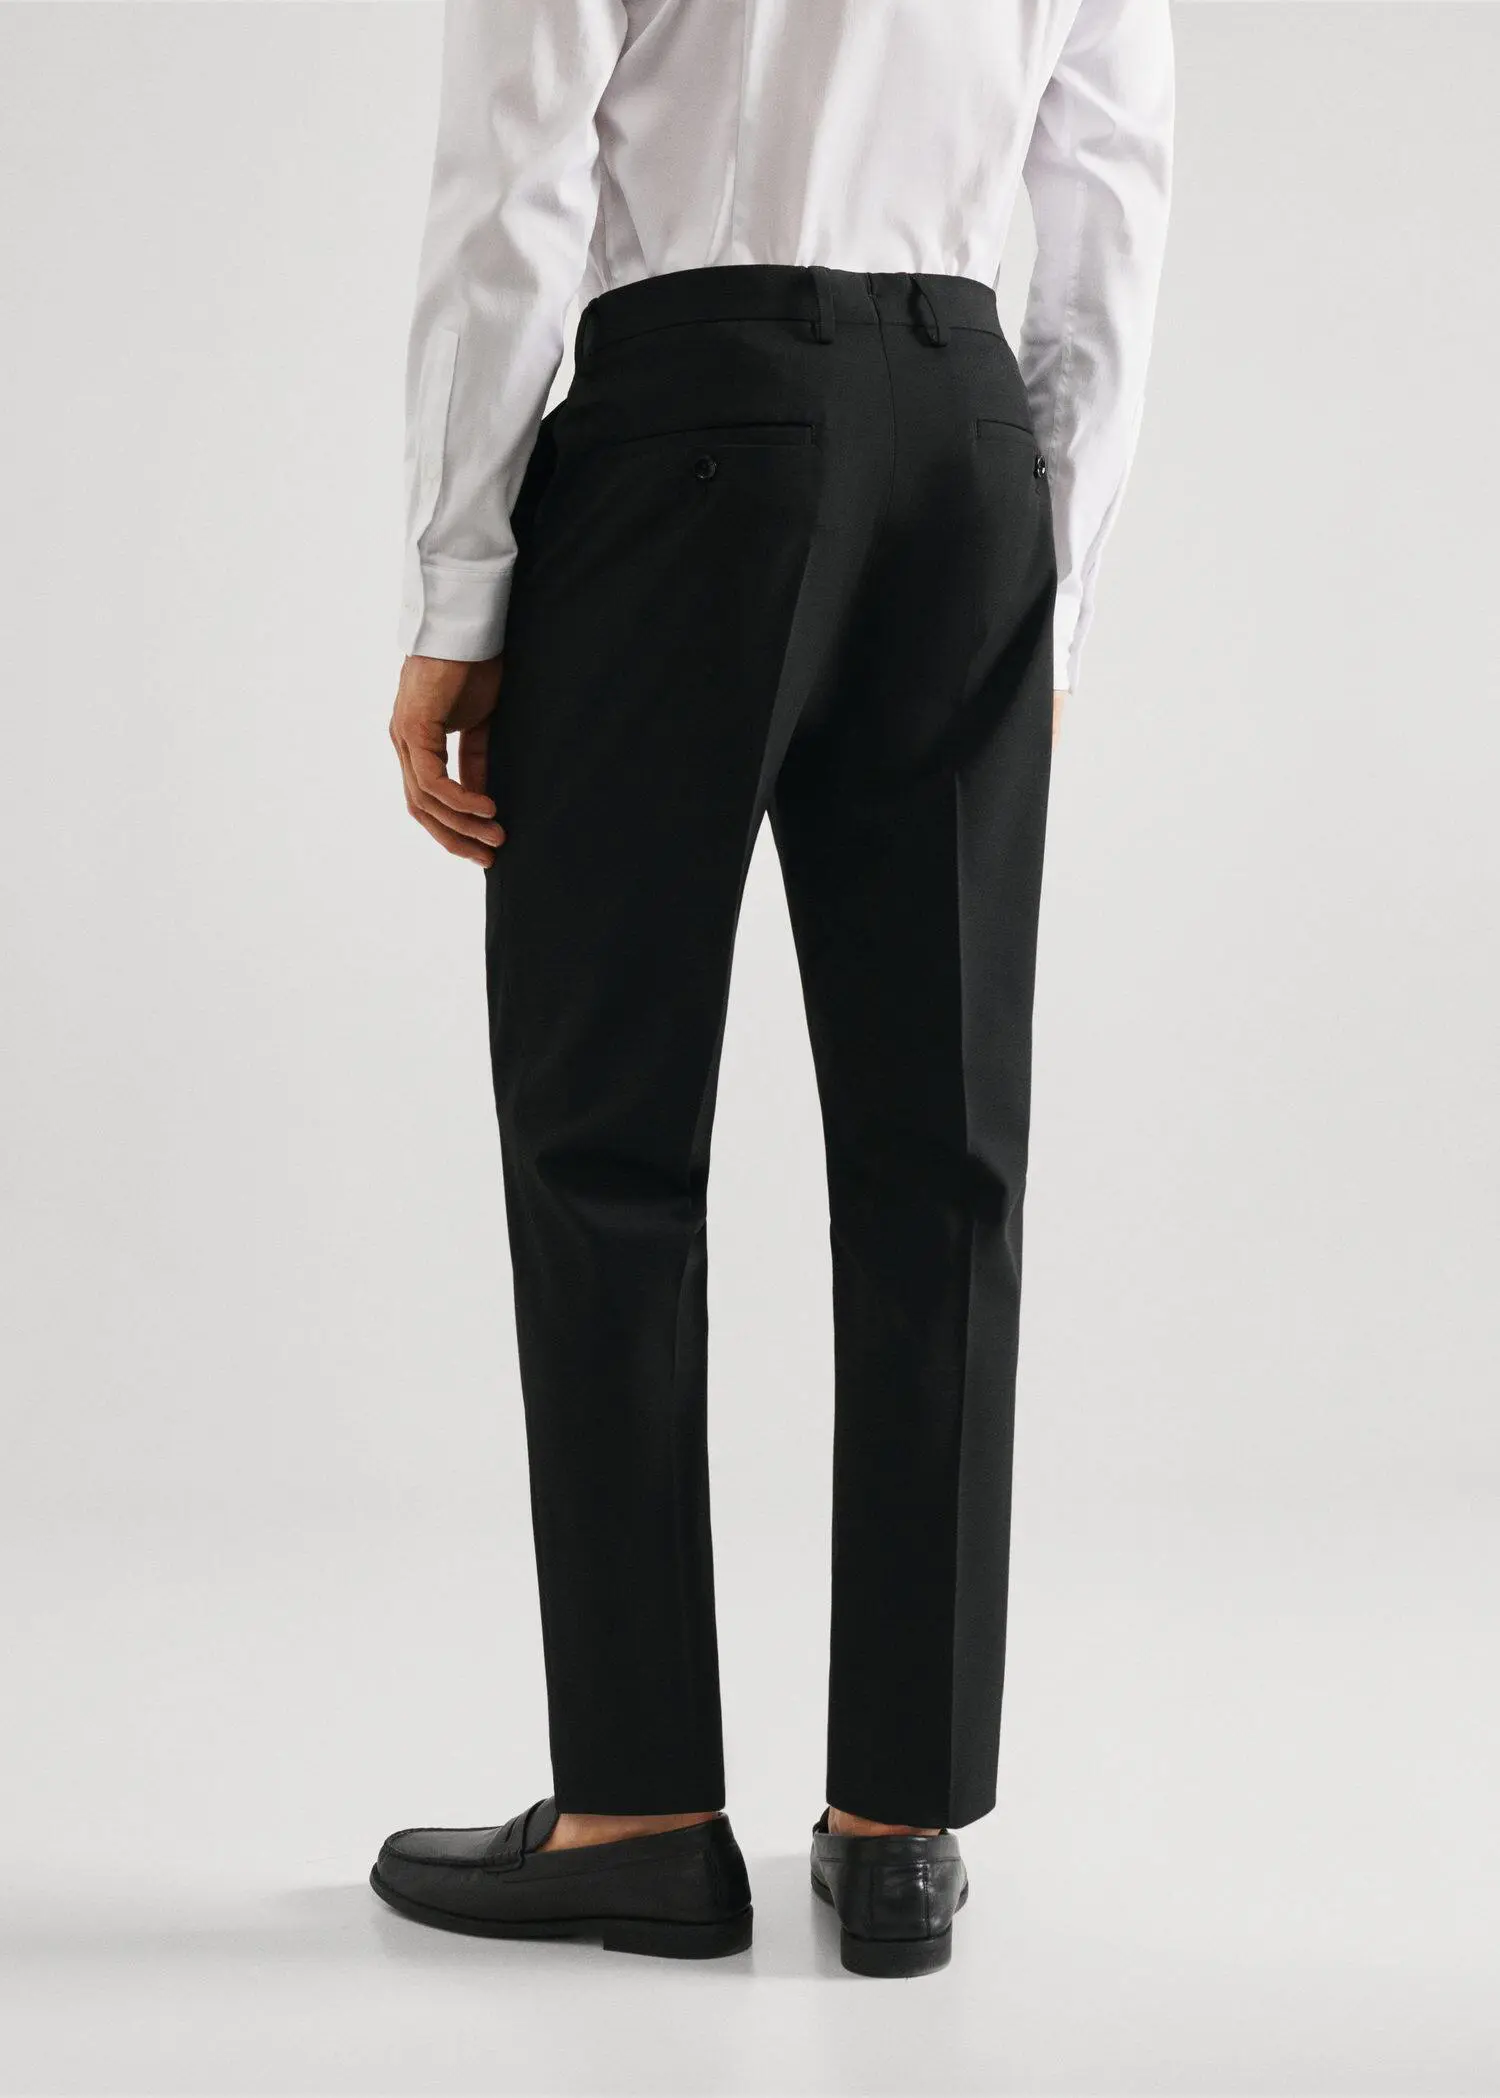 Mango Stretch fabric super slim-fit suit pants. a person wearing a suit and tie. 